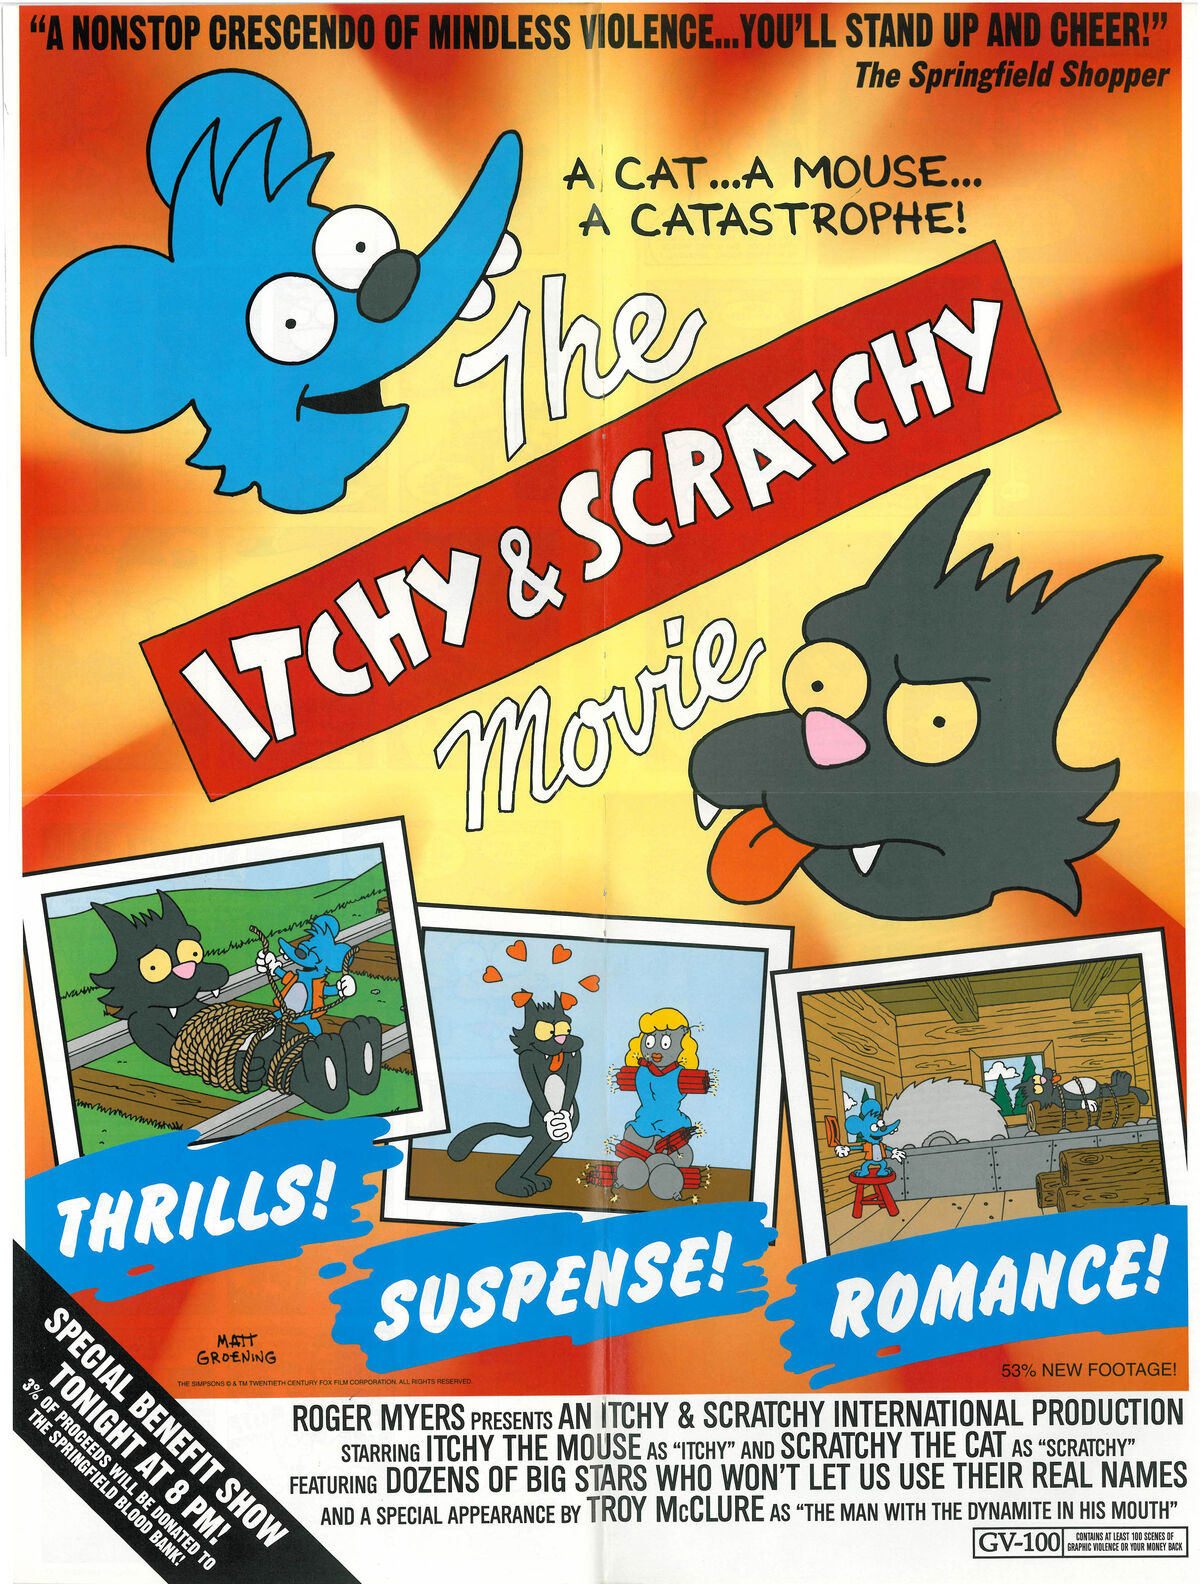 The Itchy & Scratchy Movie | Simpsons Wiki | Fandom